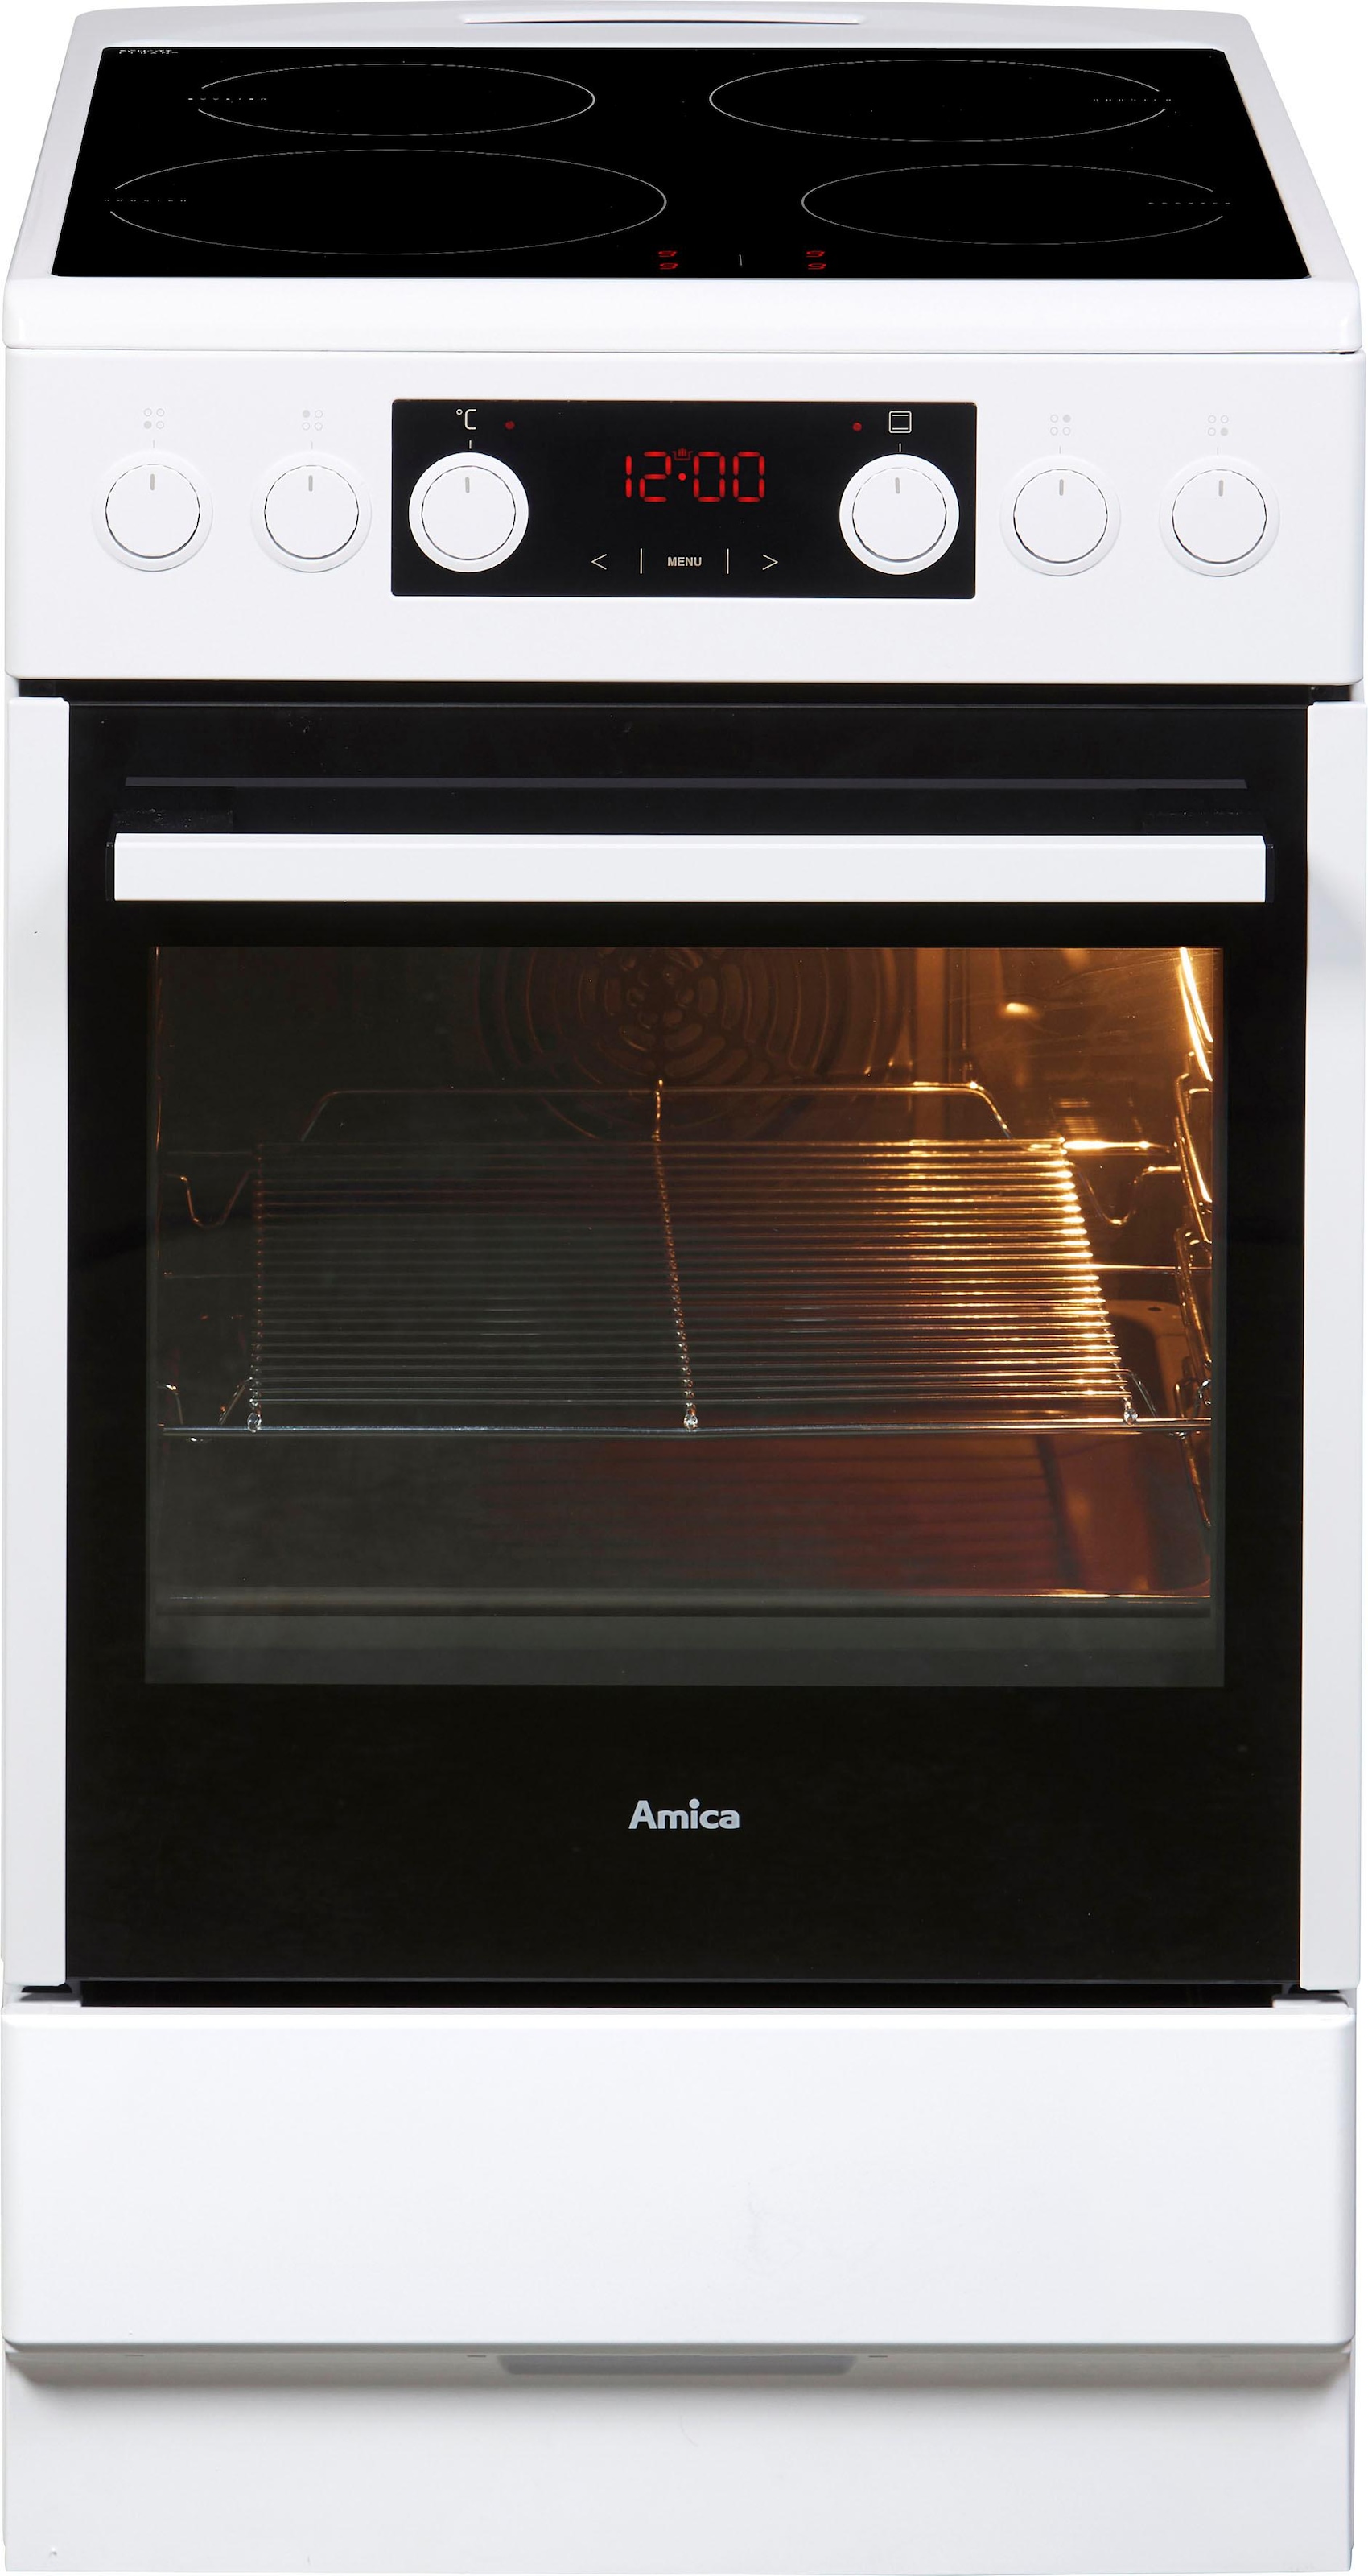 Amica Induktions-Standherd »SHI 905 100 W«, SHI 905 100 W, Steam Clean, RapidWarmUp-Funktion